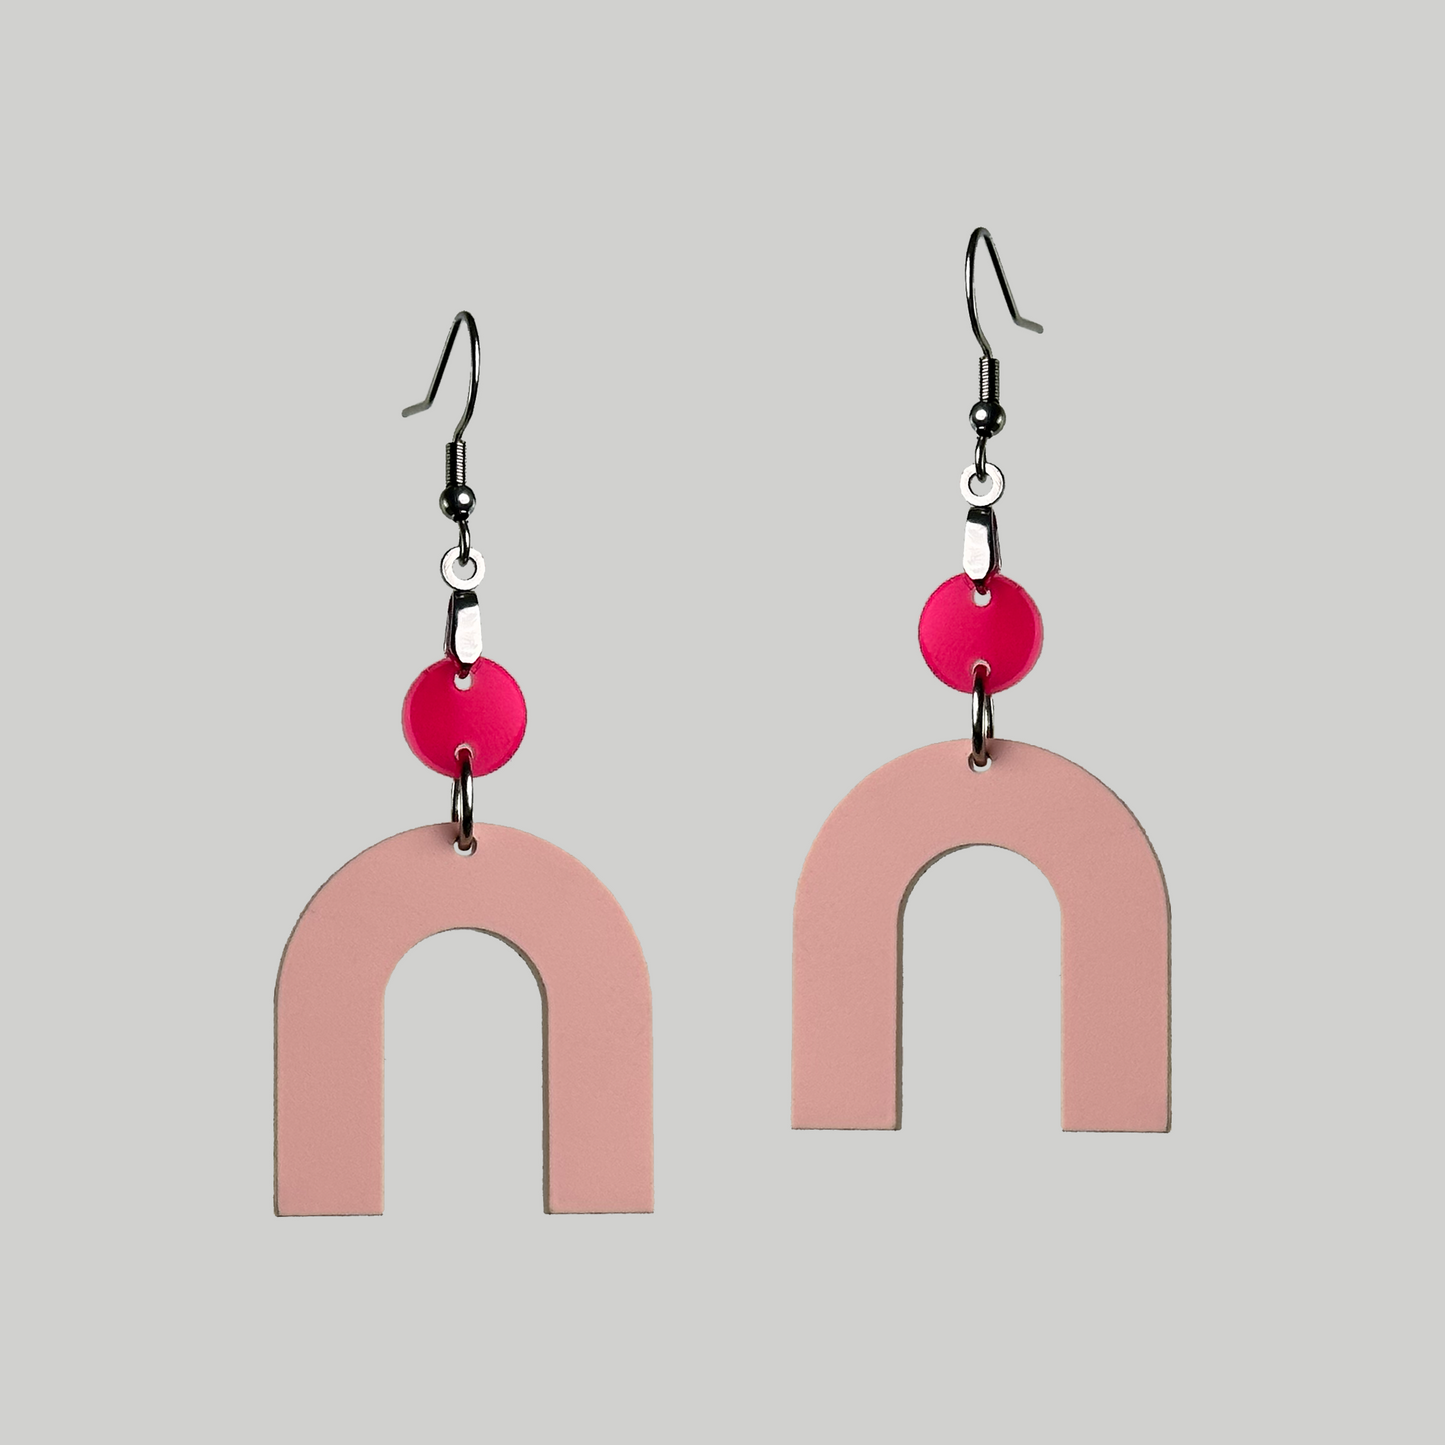 Colorful Arch Earrings by Our Family Designs.